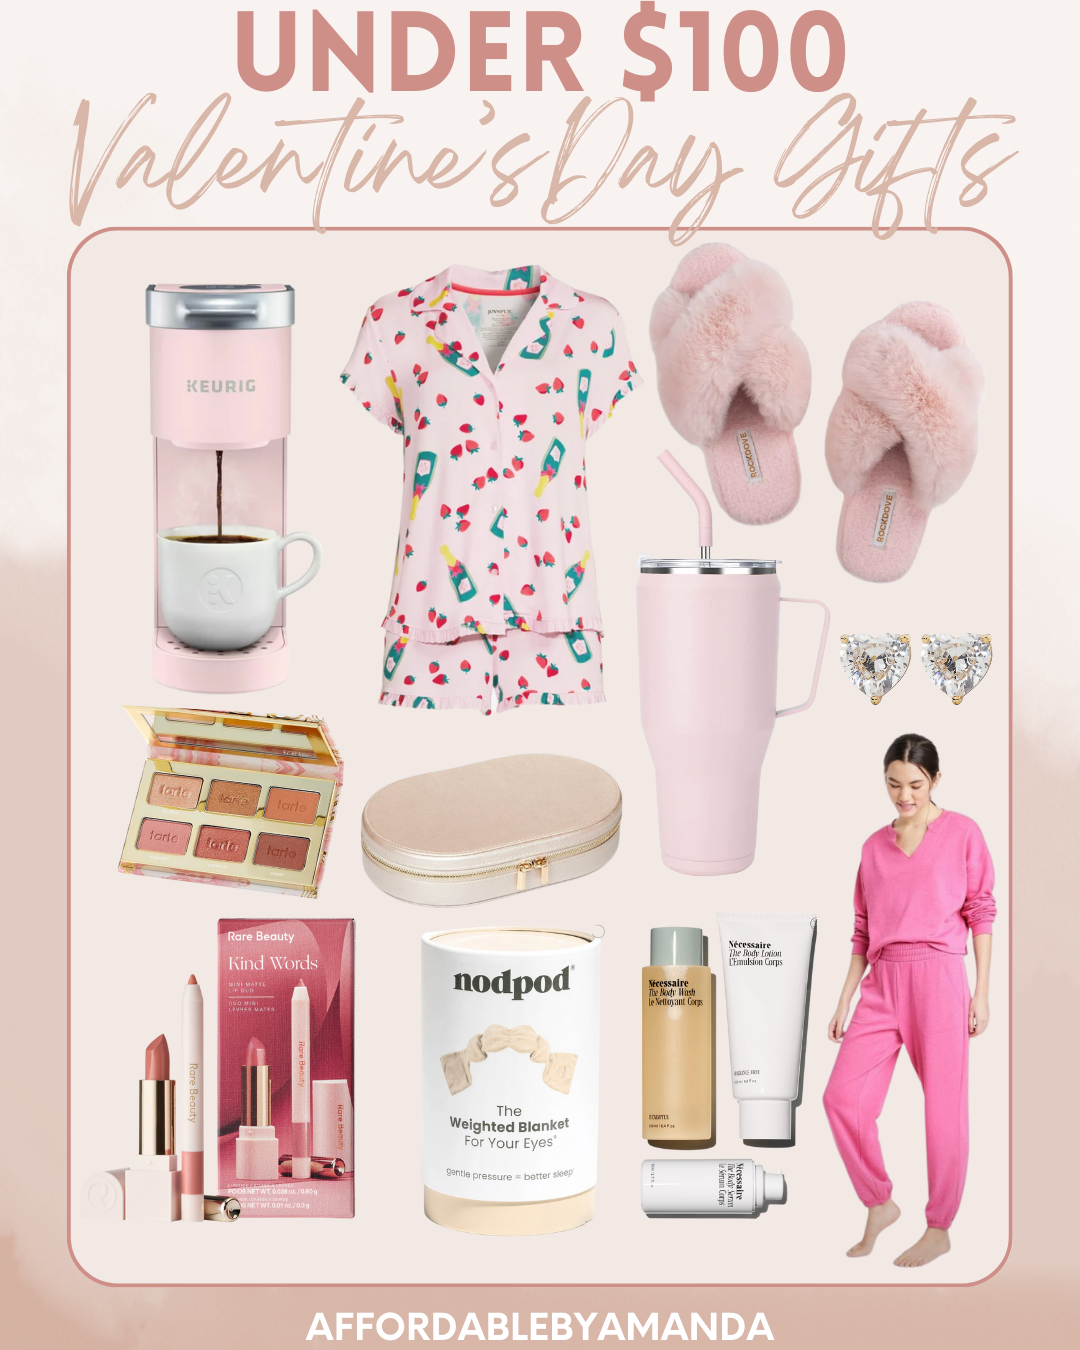 50 Best Valentine's Day Gifts for Her at Every Price | Best Valentine's Day Ideas for Her | Non Cheesy Valentine's Day Gifts for Her | Affordable by Amanda